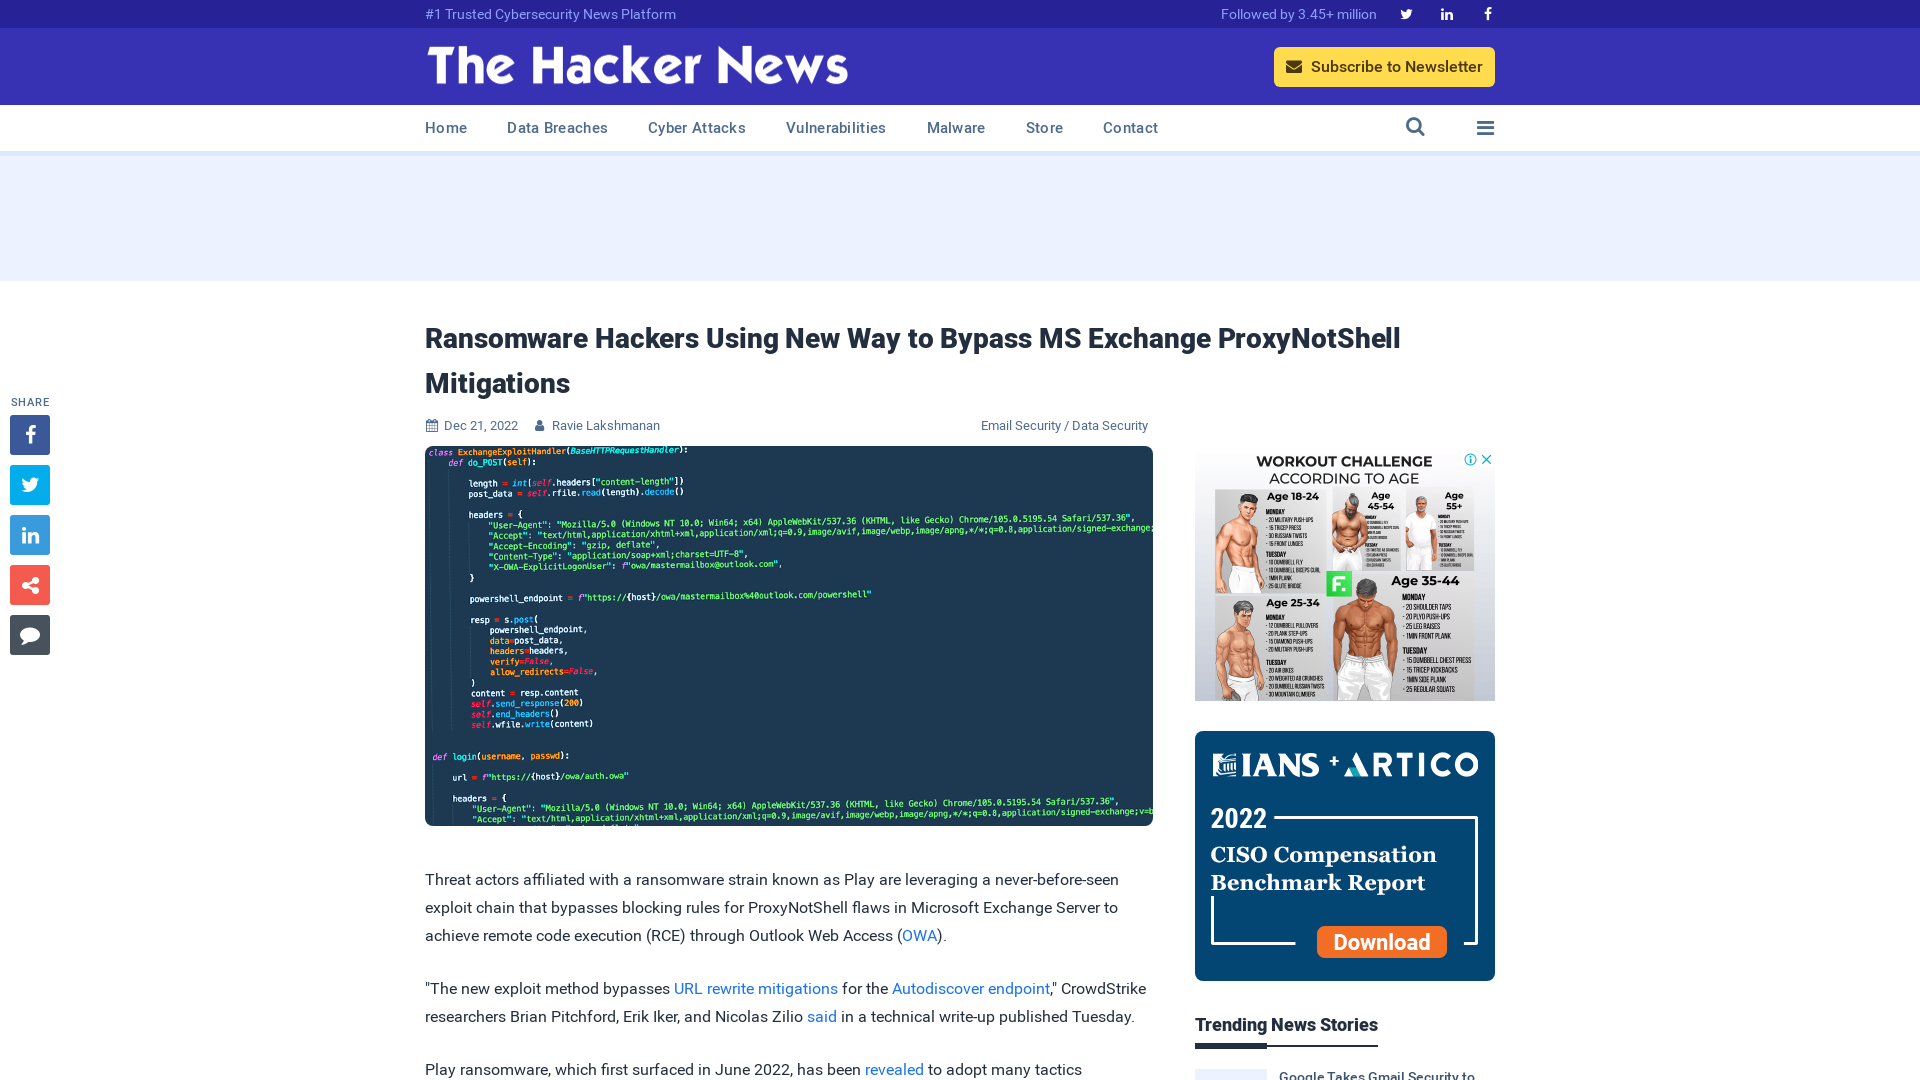 Ransomware Hackers Using New Way to Bypass MS Exchange ProxyNotShell Mitigations